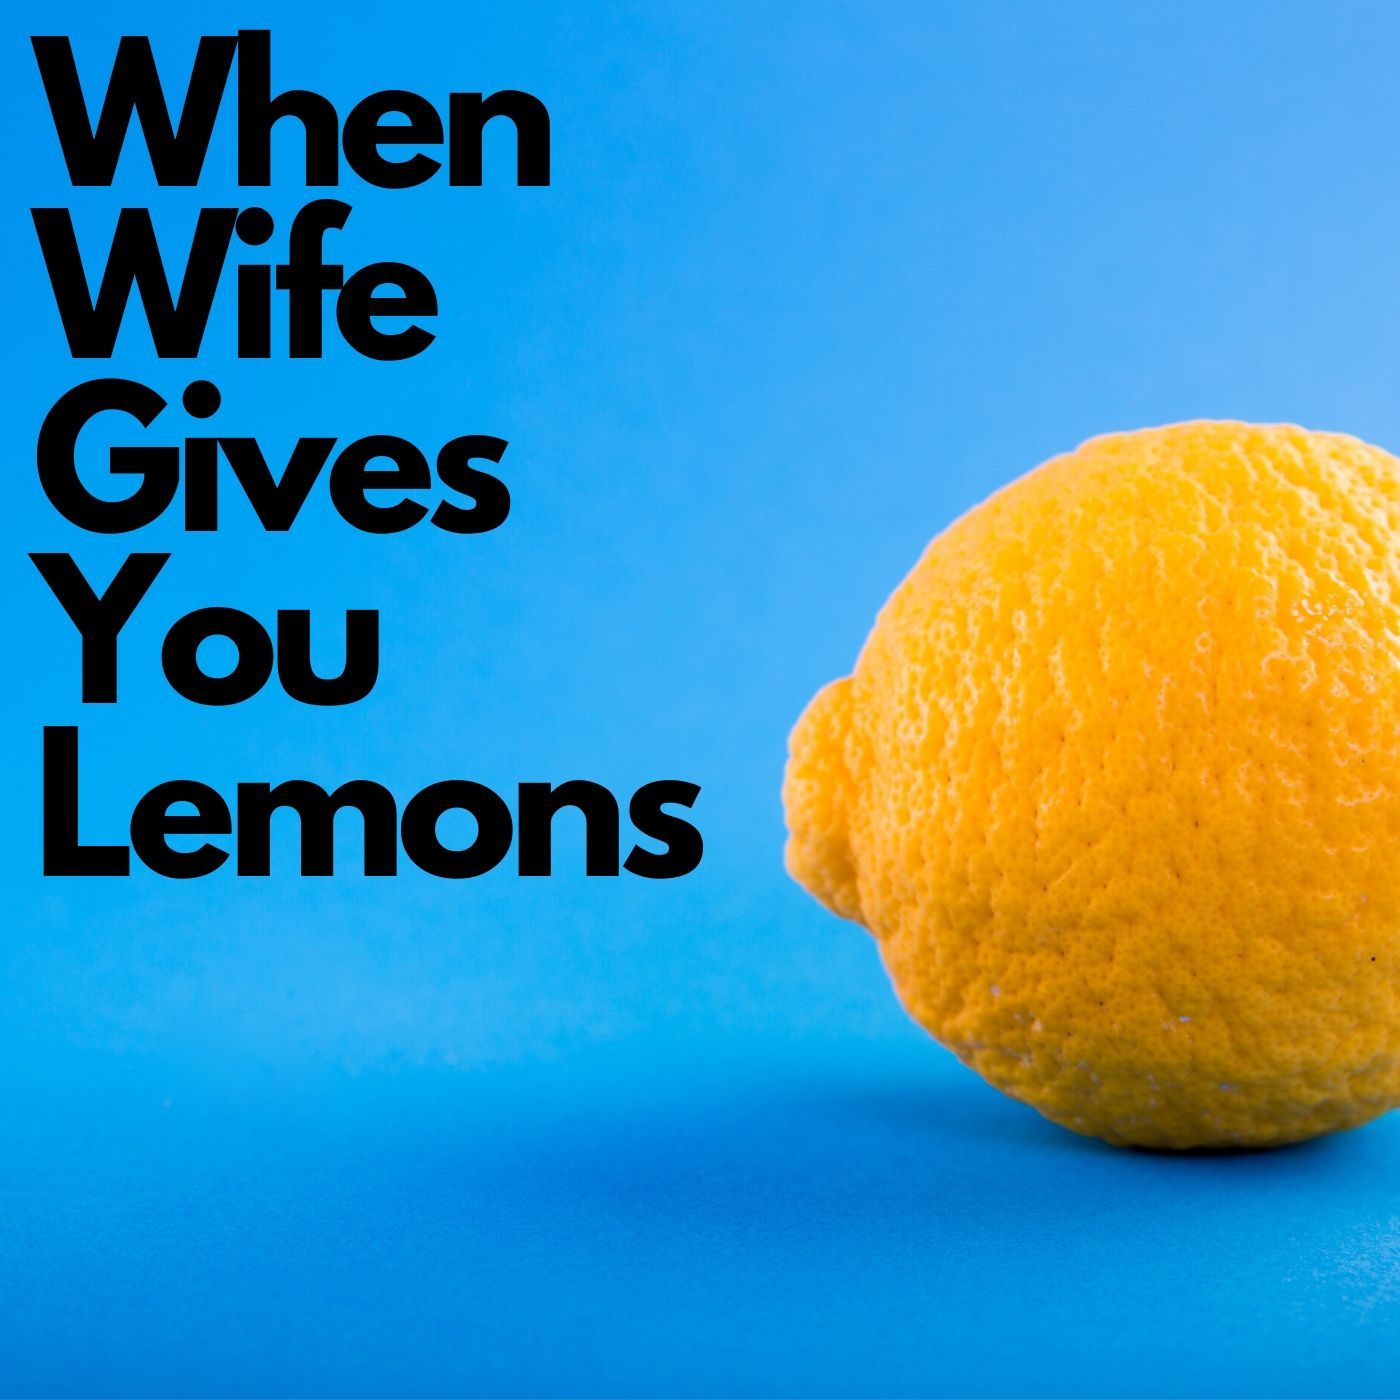 When Wife Gives You Lemons